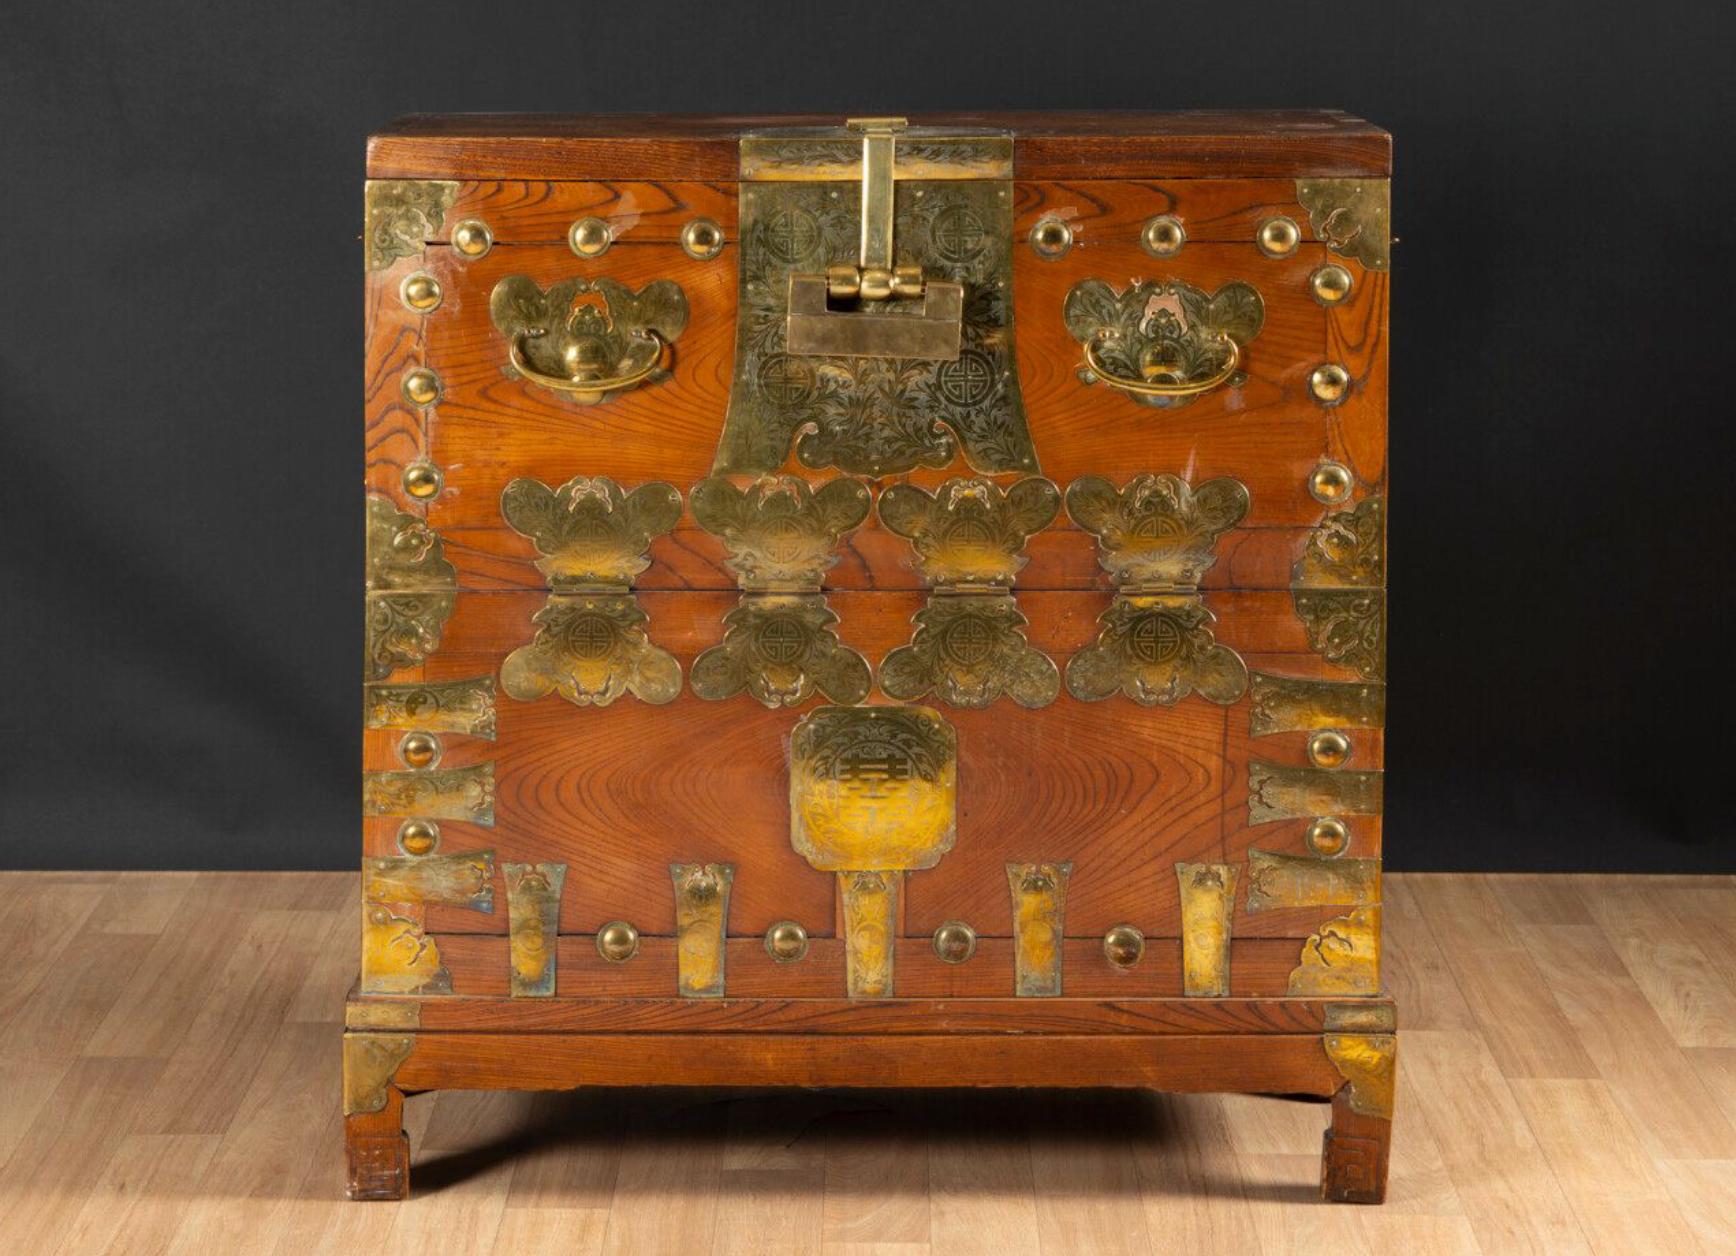 Chest in natural wood made in late 19th century and lately transformed into a secretary with red interior. The gilded brass fittings depicting stylized butterflies, finely chiseled with plant motifs and symbols of longevity. There is the original